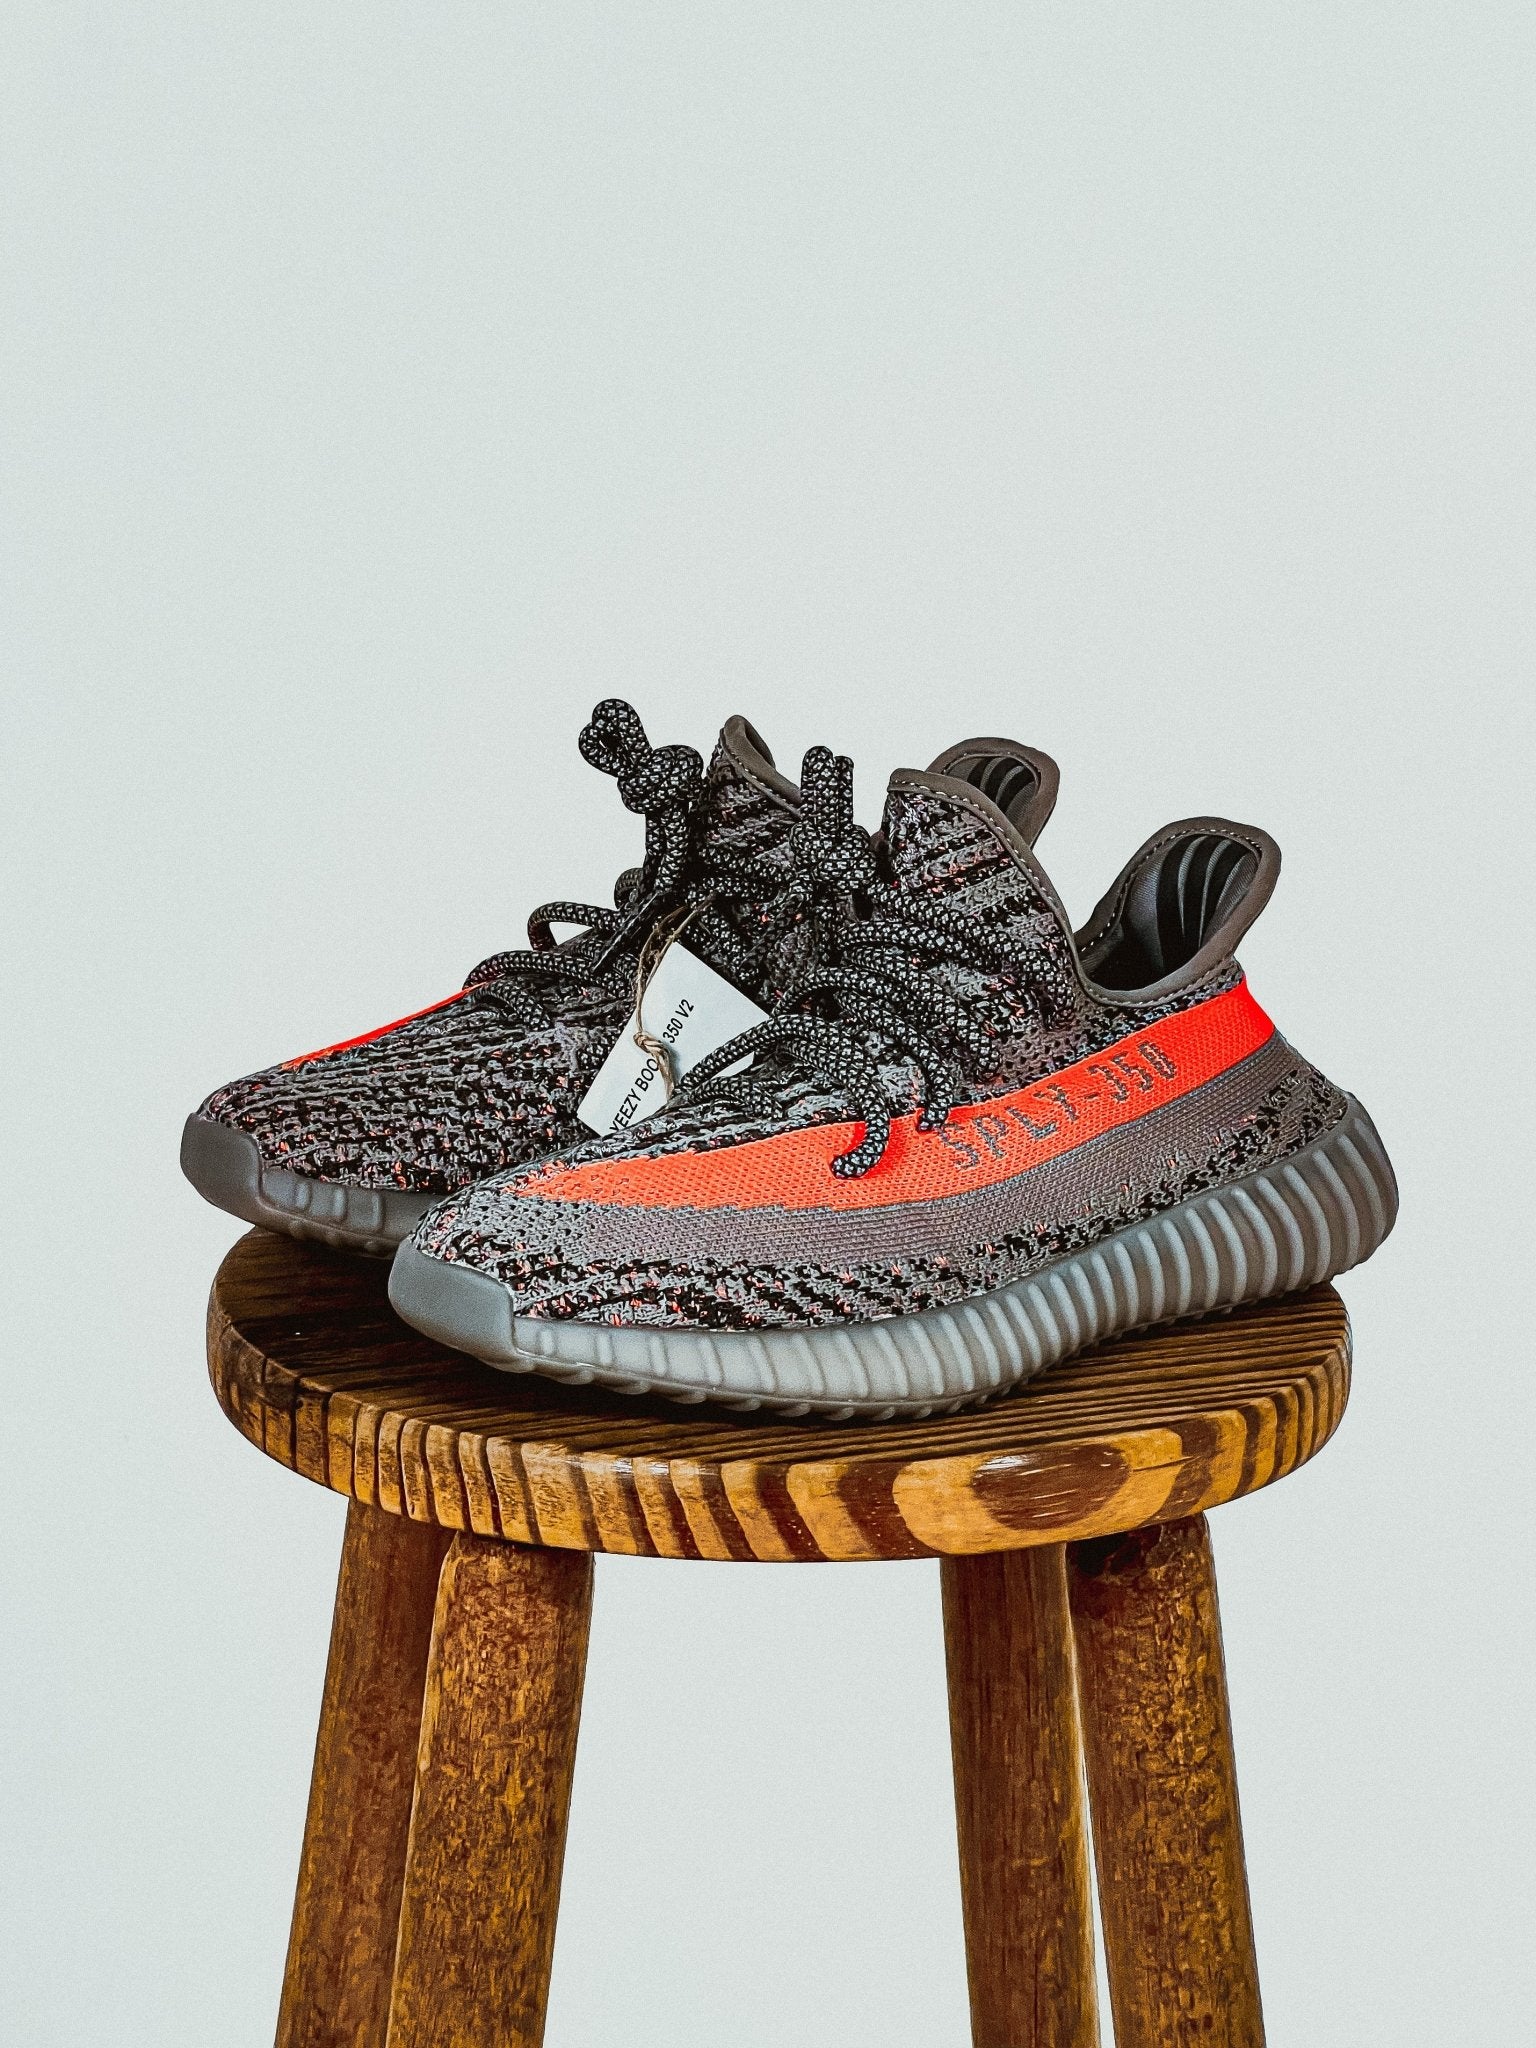 Yeezy Boost 350 v2 Beluga Reflective - Drizzle